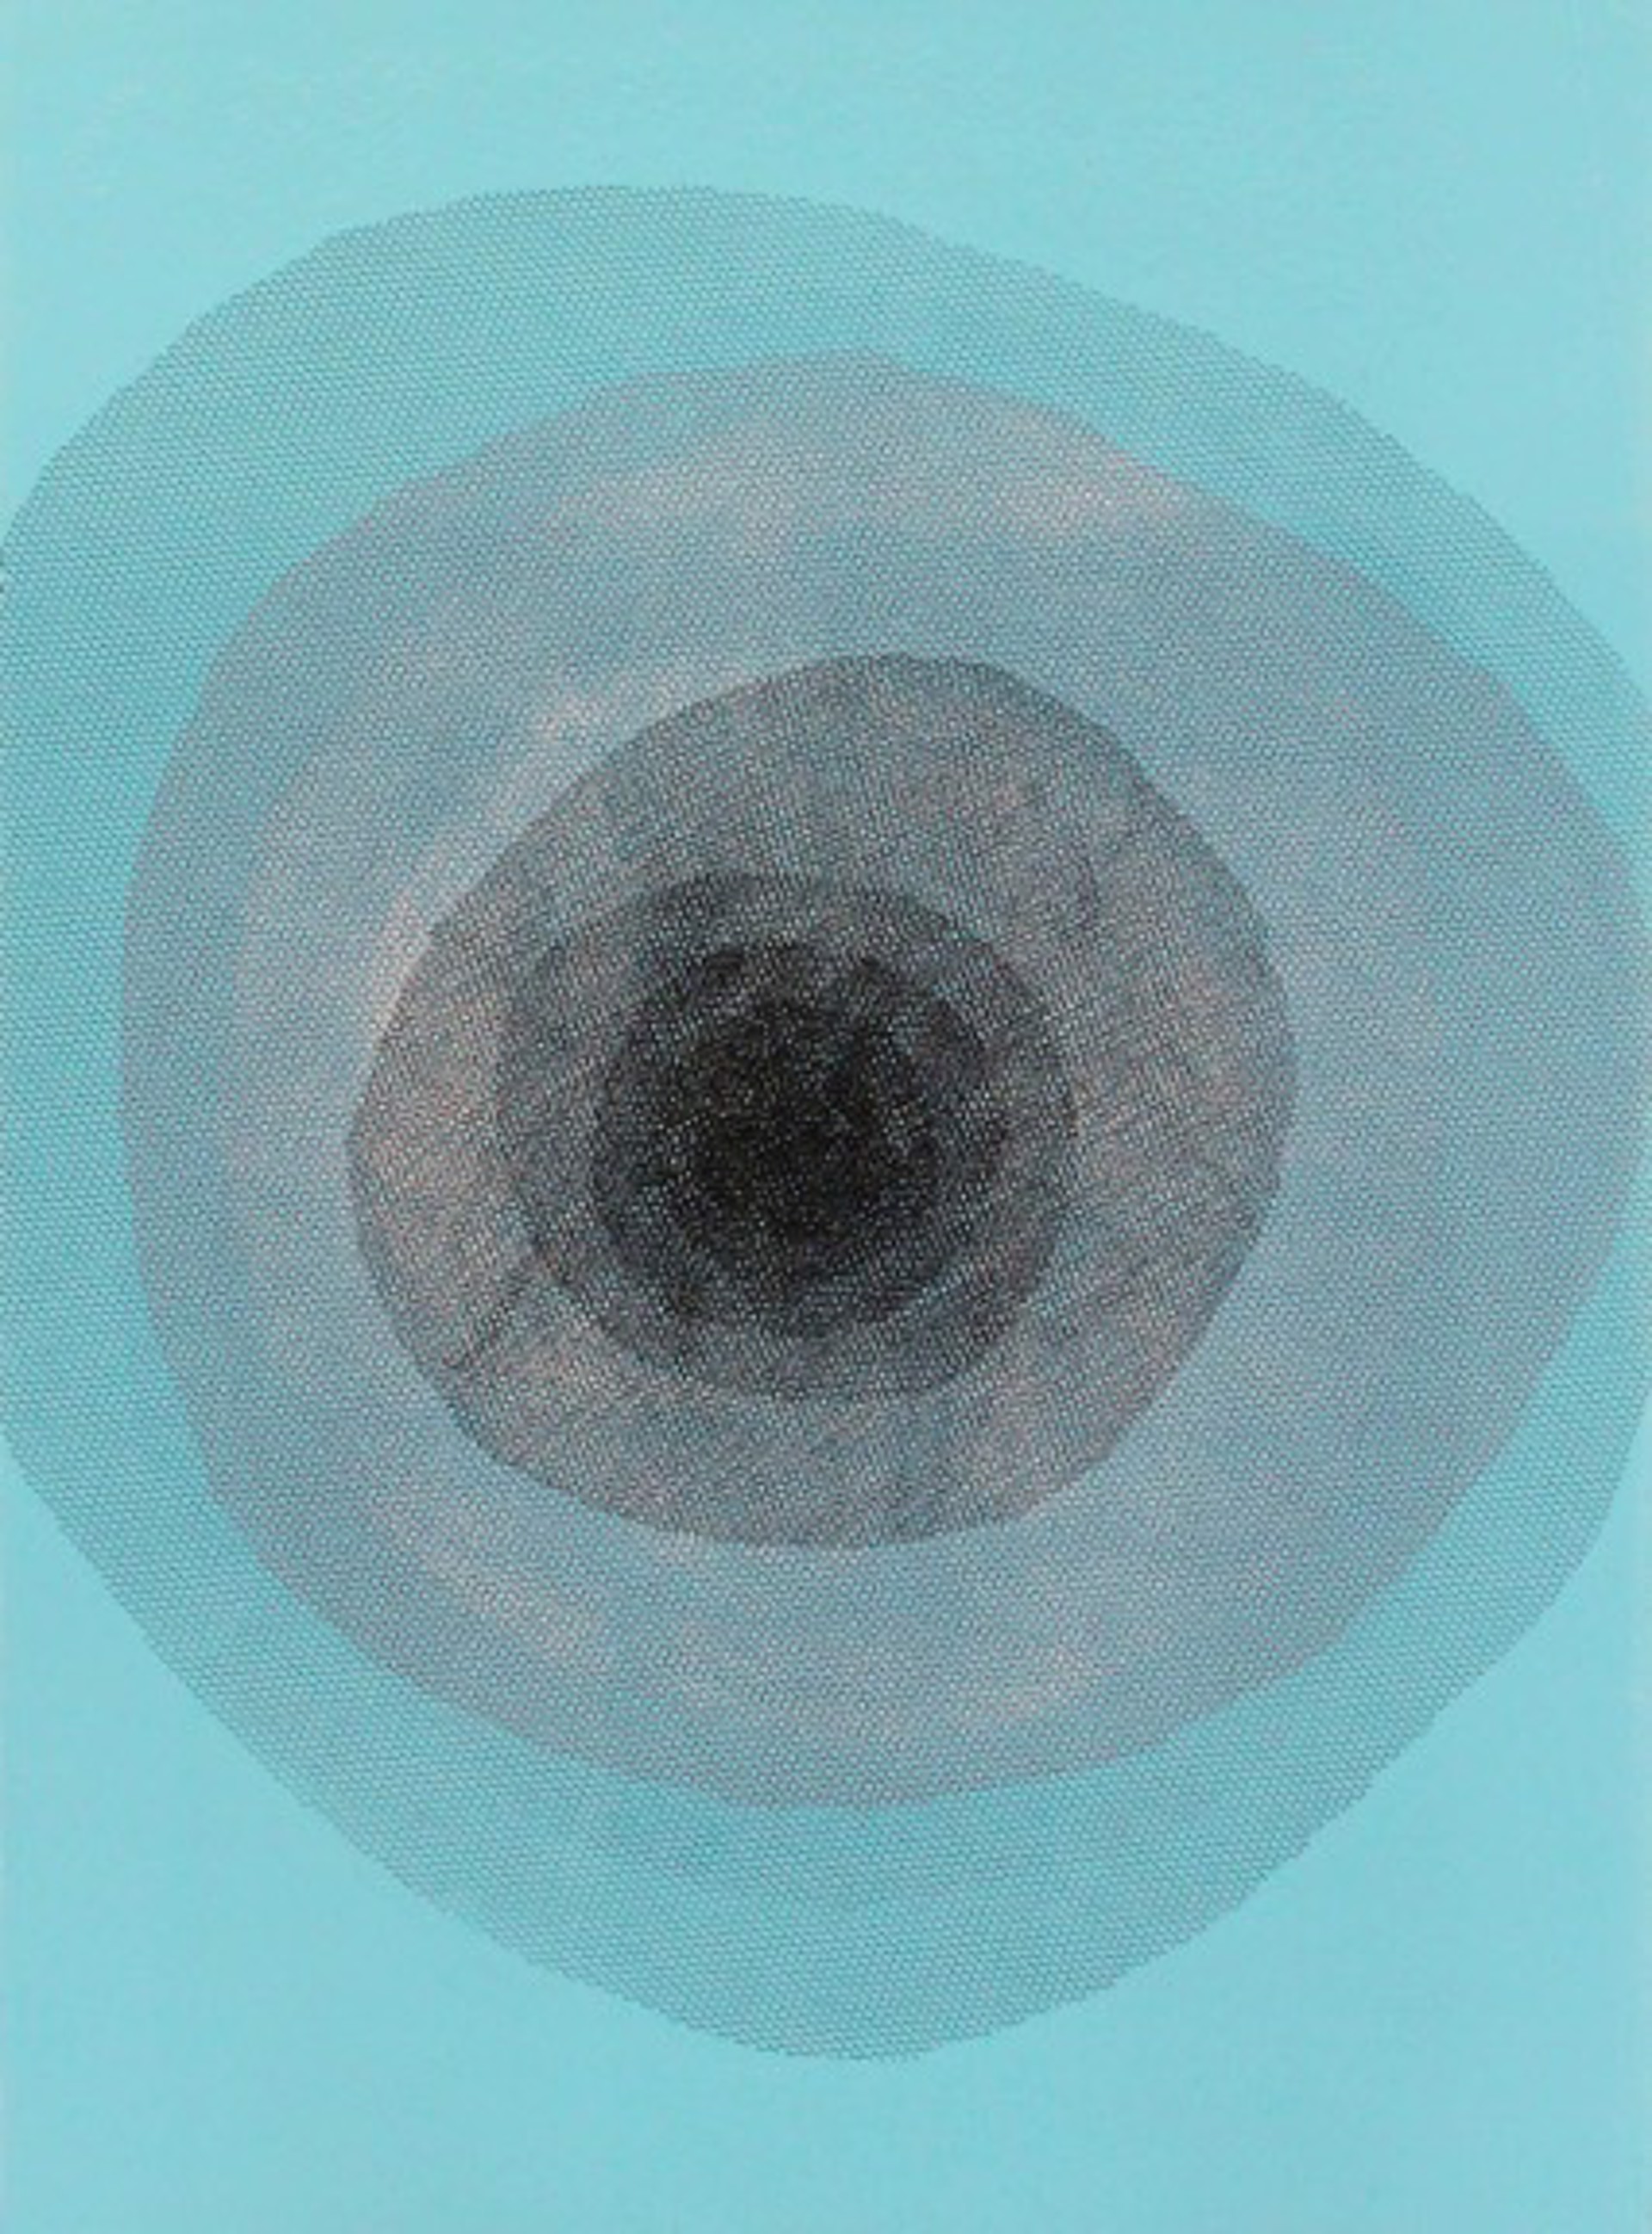 Ring Series #404 by Orna Feinstein